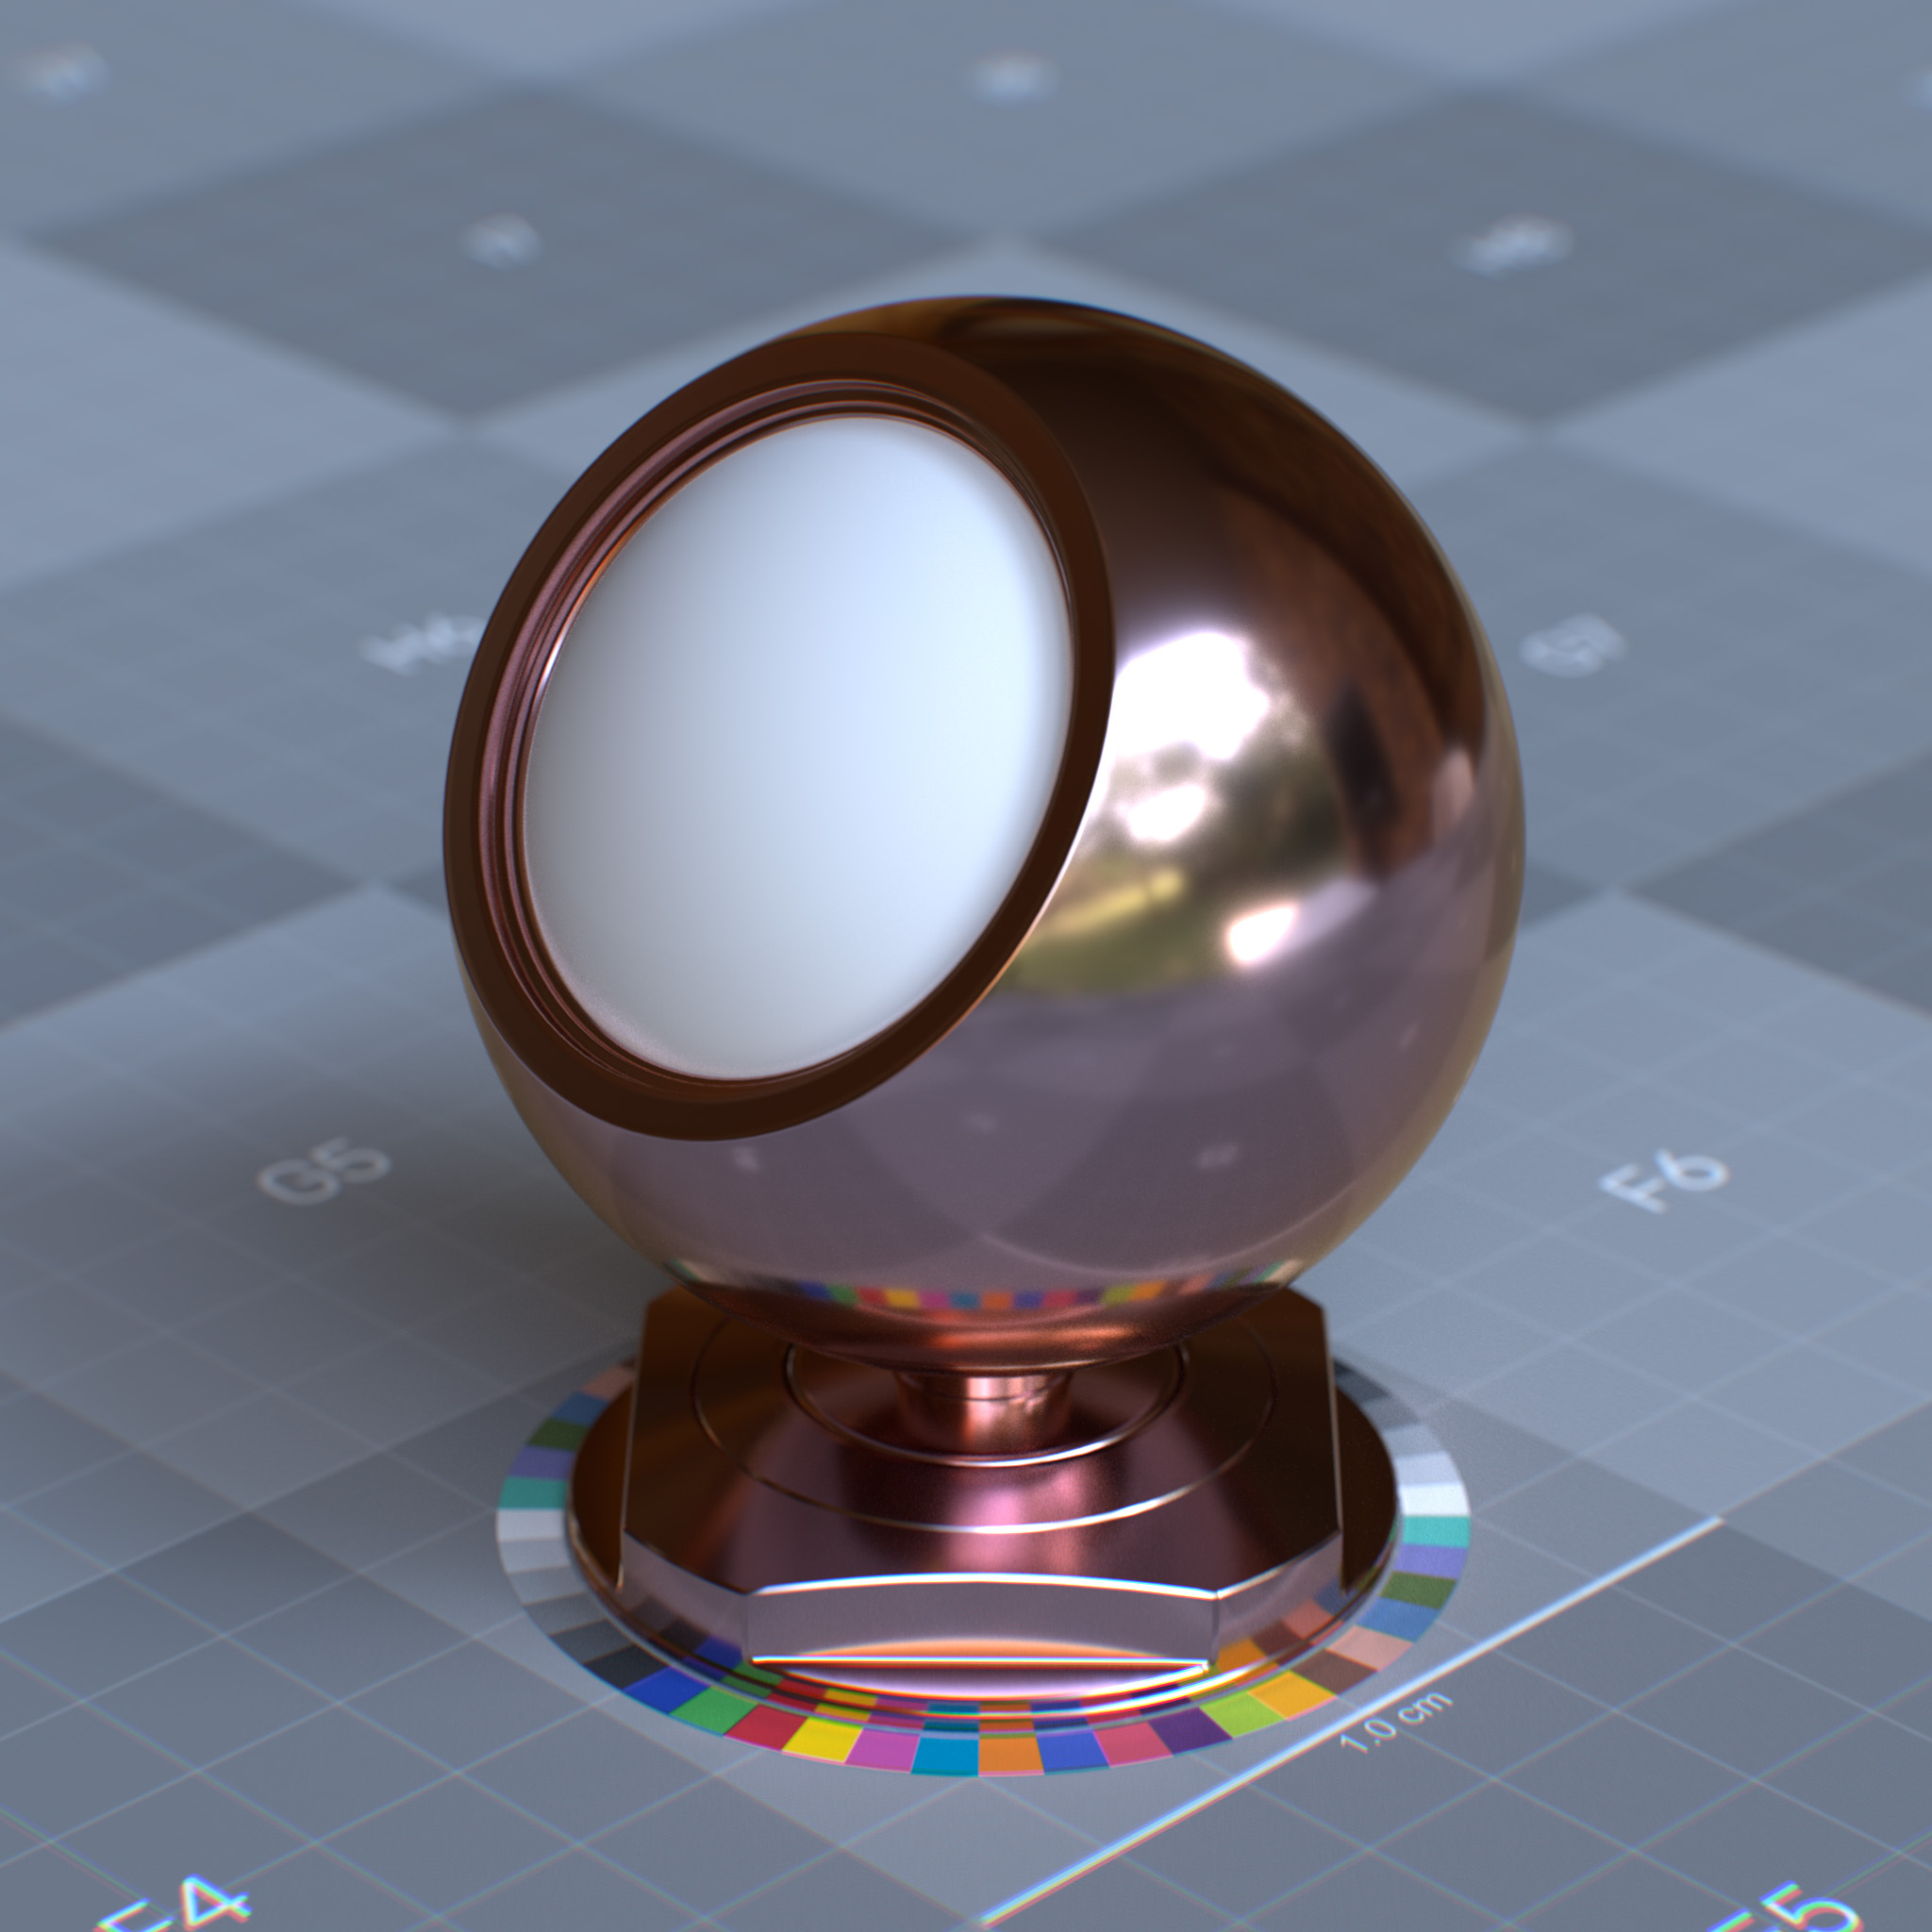 rtx_material_omnisurfacebase_specular_reflection_anisotropy_0p0